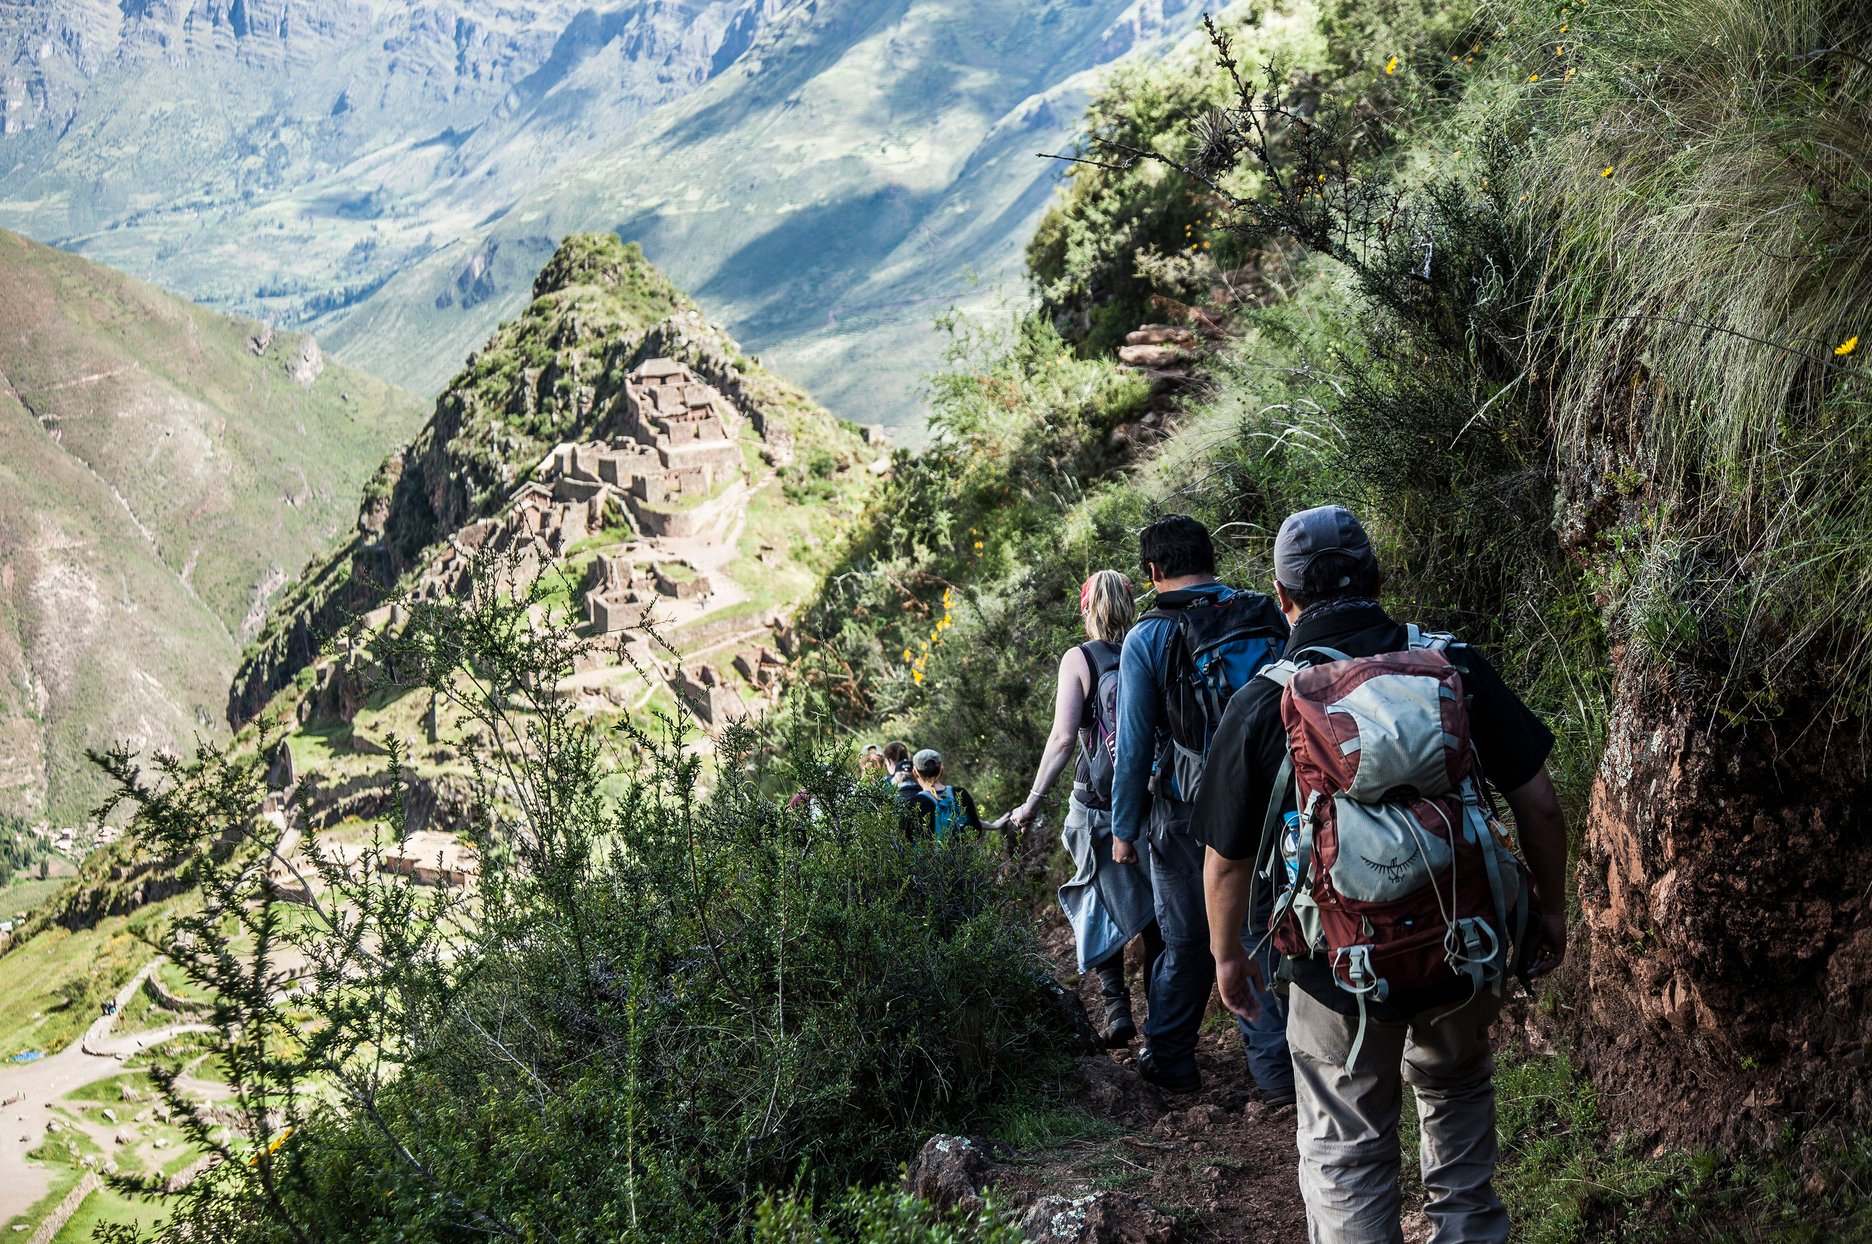 Inca Trail Permits Sold Out? Check Out These Alternative Treks